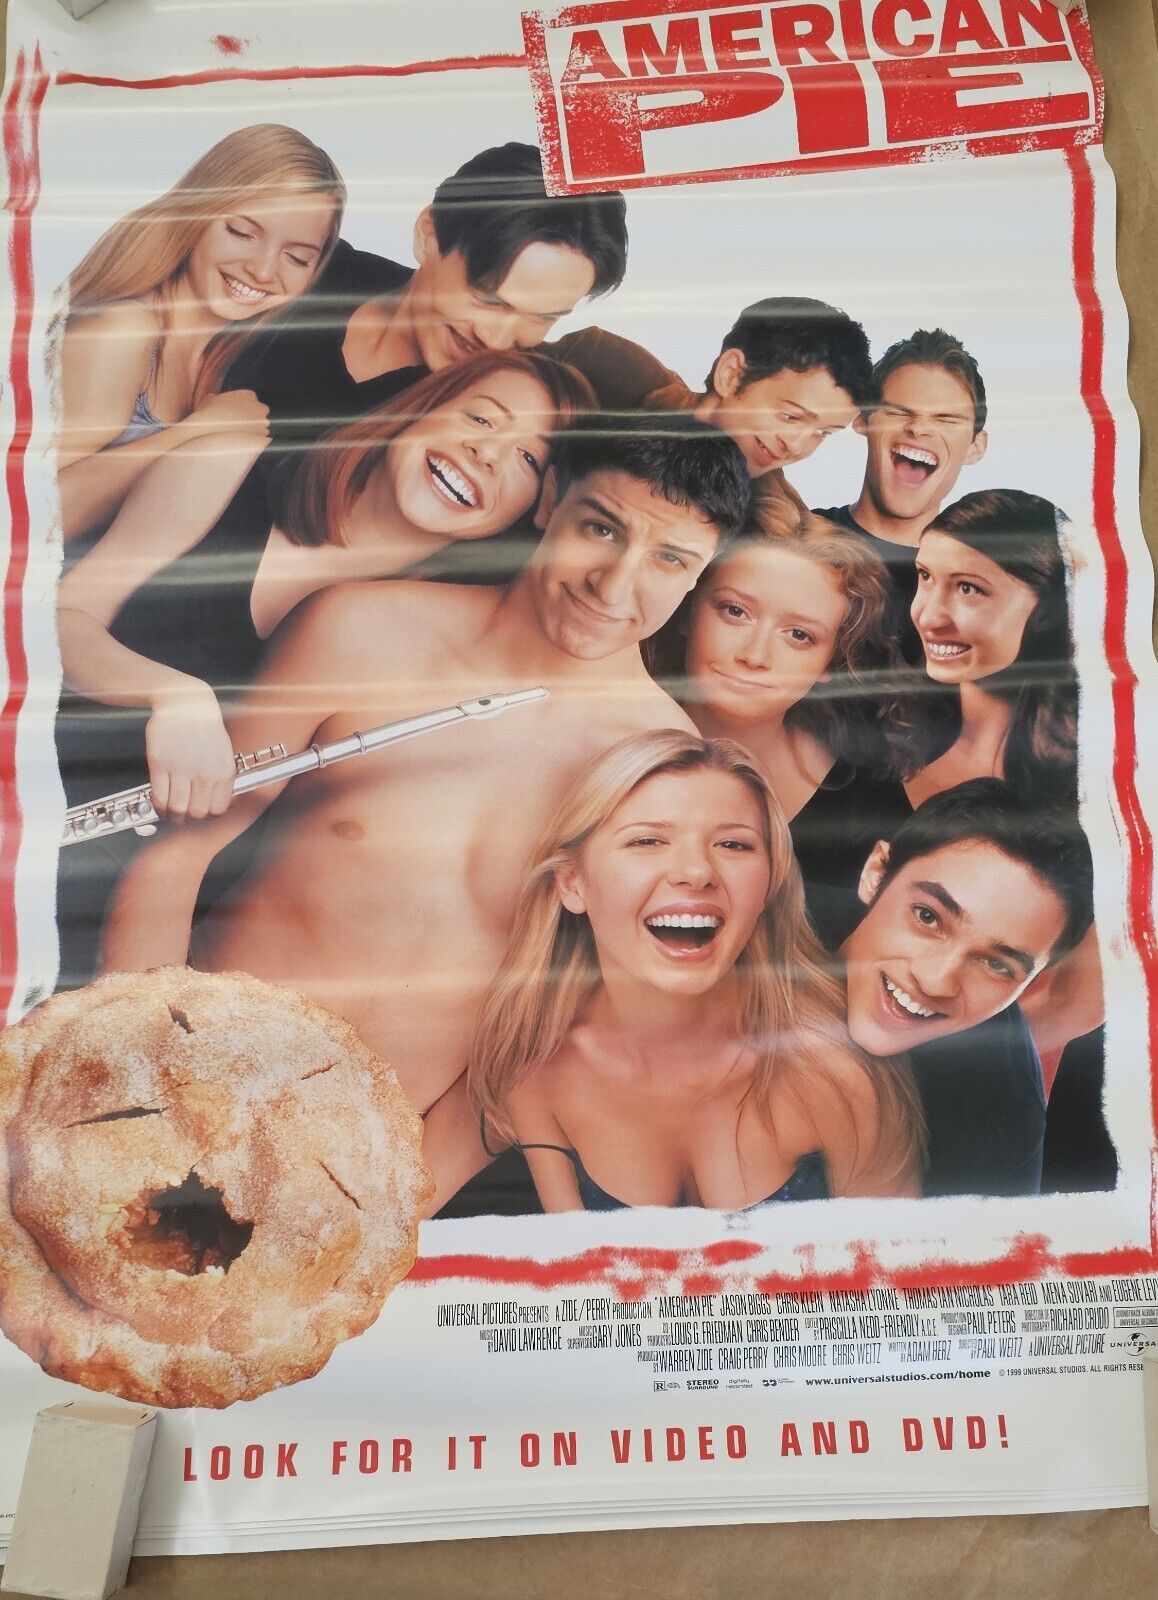 American Pie Cult Classic DVD promotional movie poster